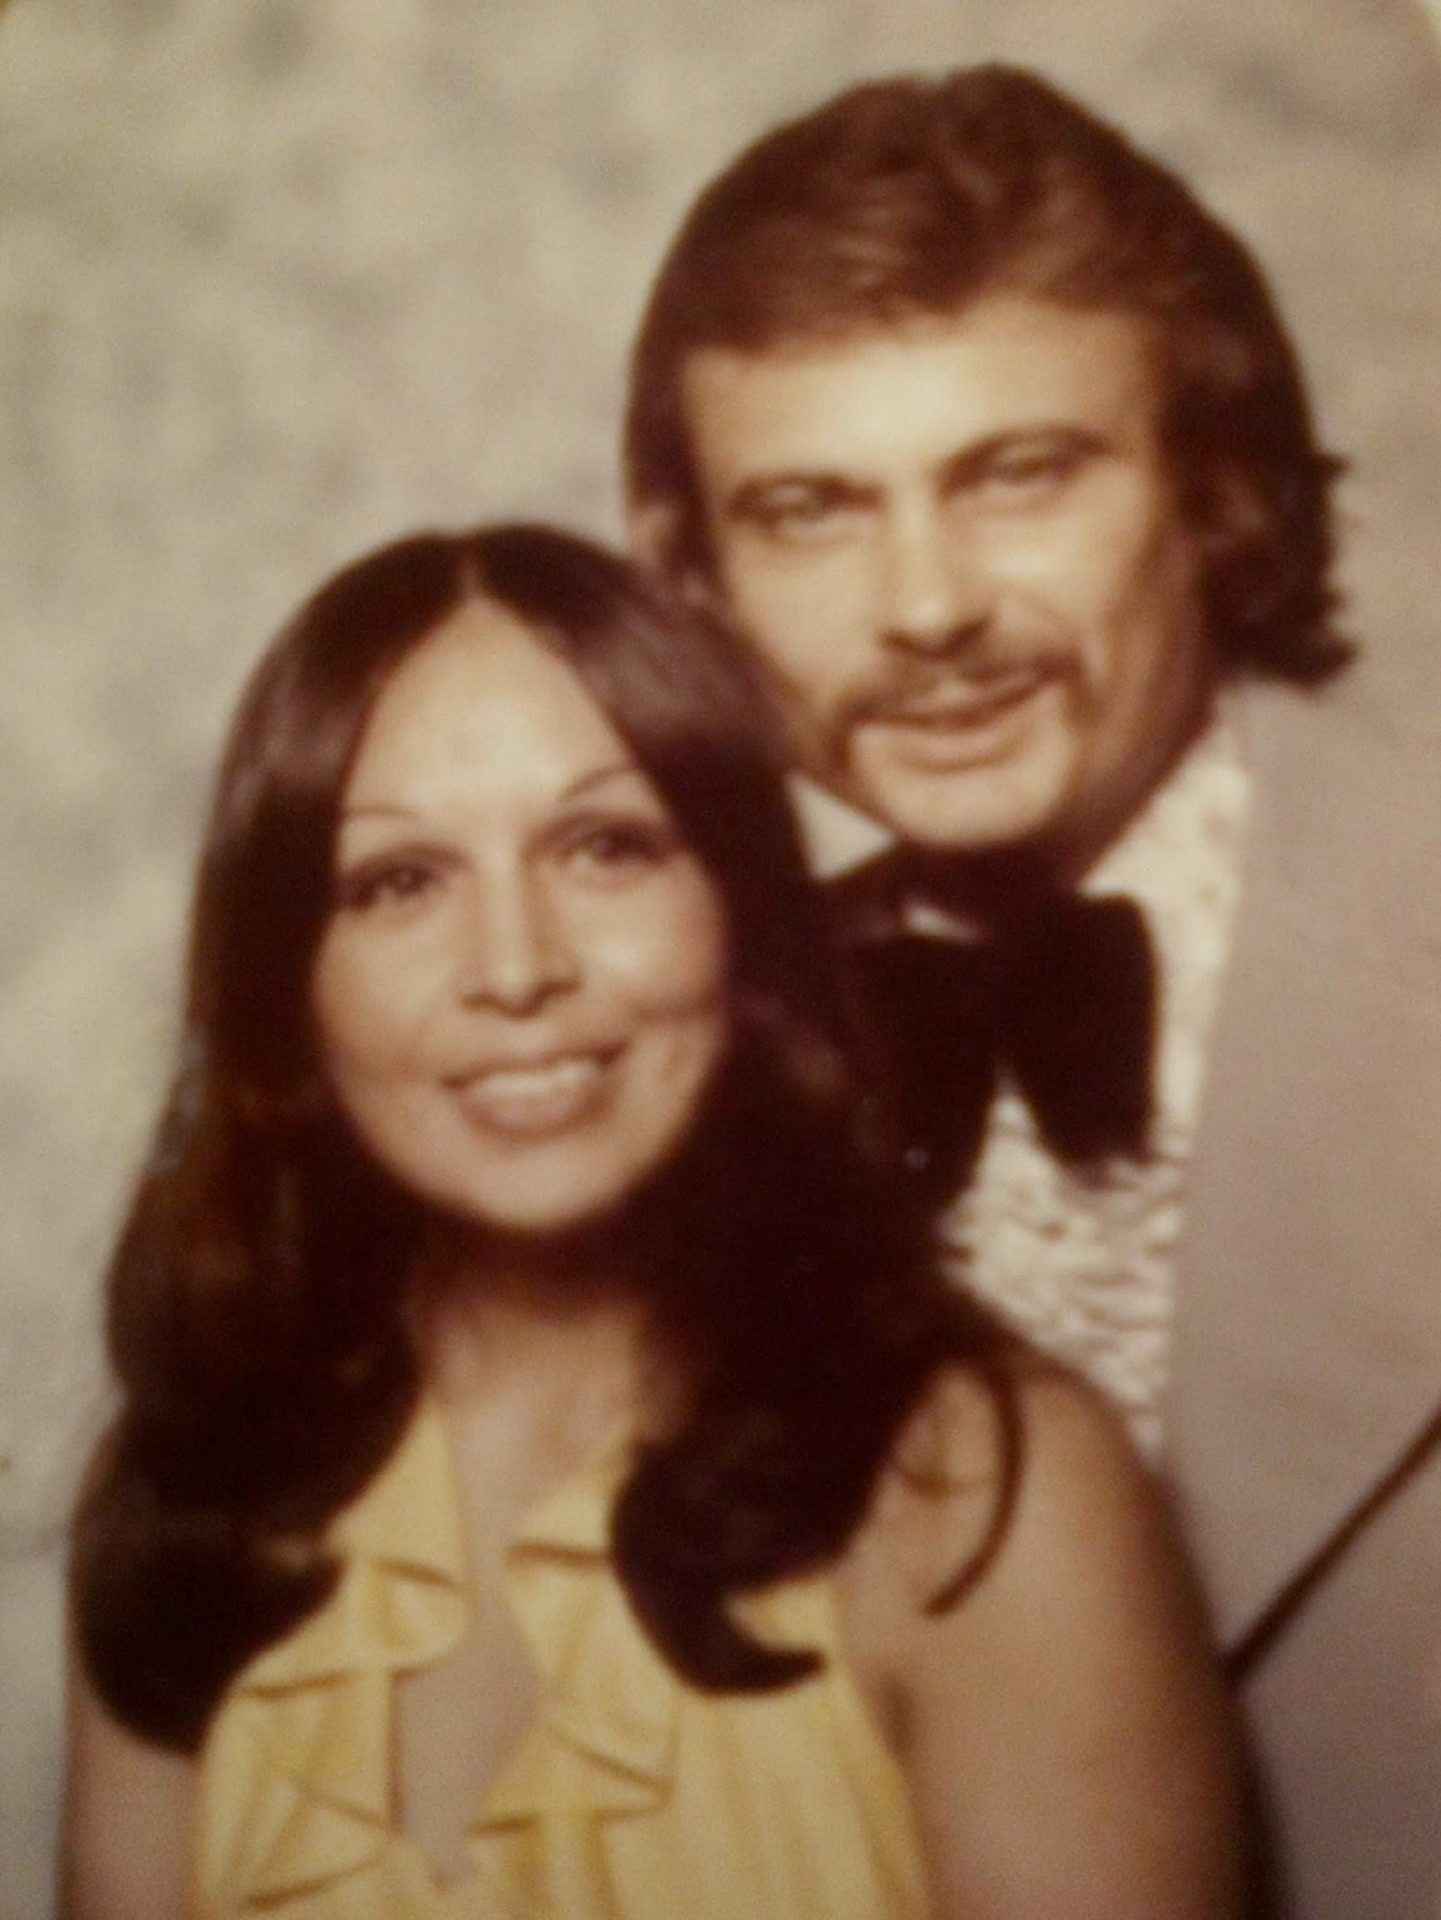 Our 1975 picture at my 10 year high school reunion. I was so shocked to hear that you kept this picture of us for over 40 years. <br />
You were always such a romantic, sexy man!